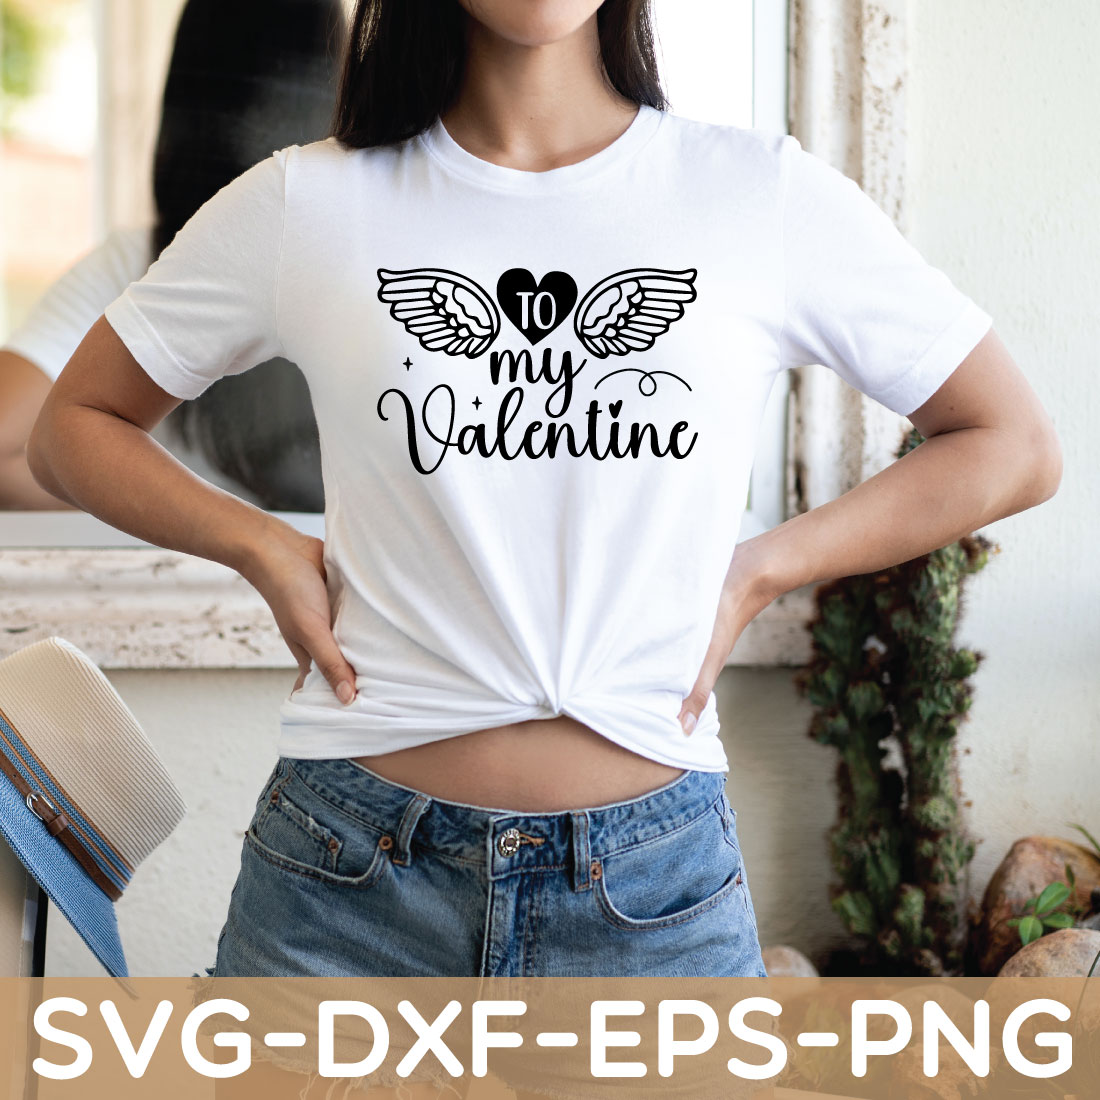 to my valentine shirt preview image.